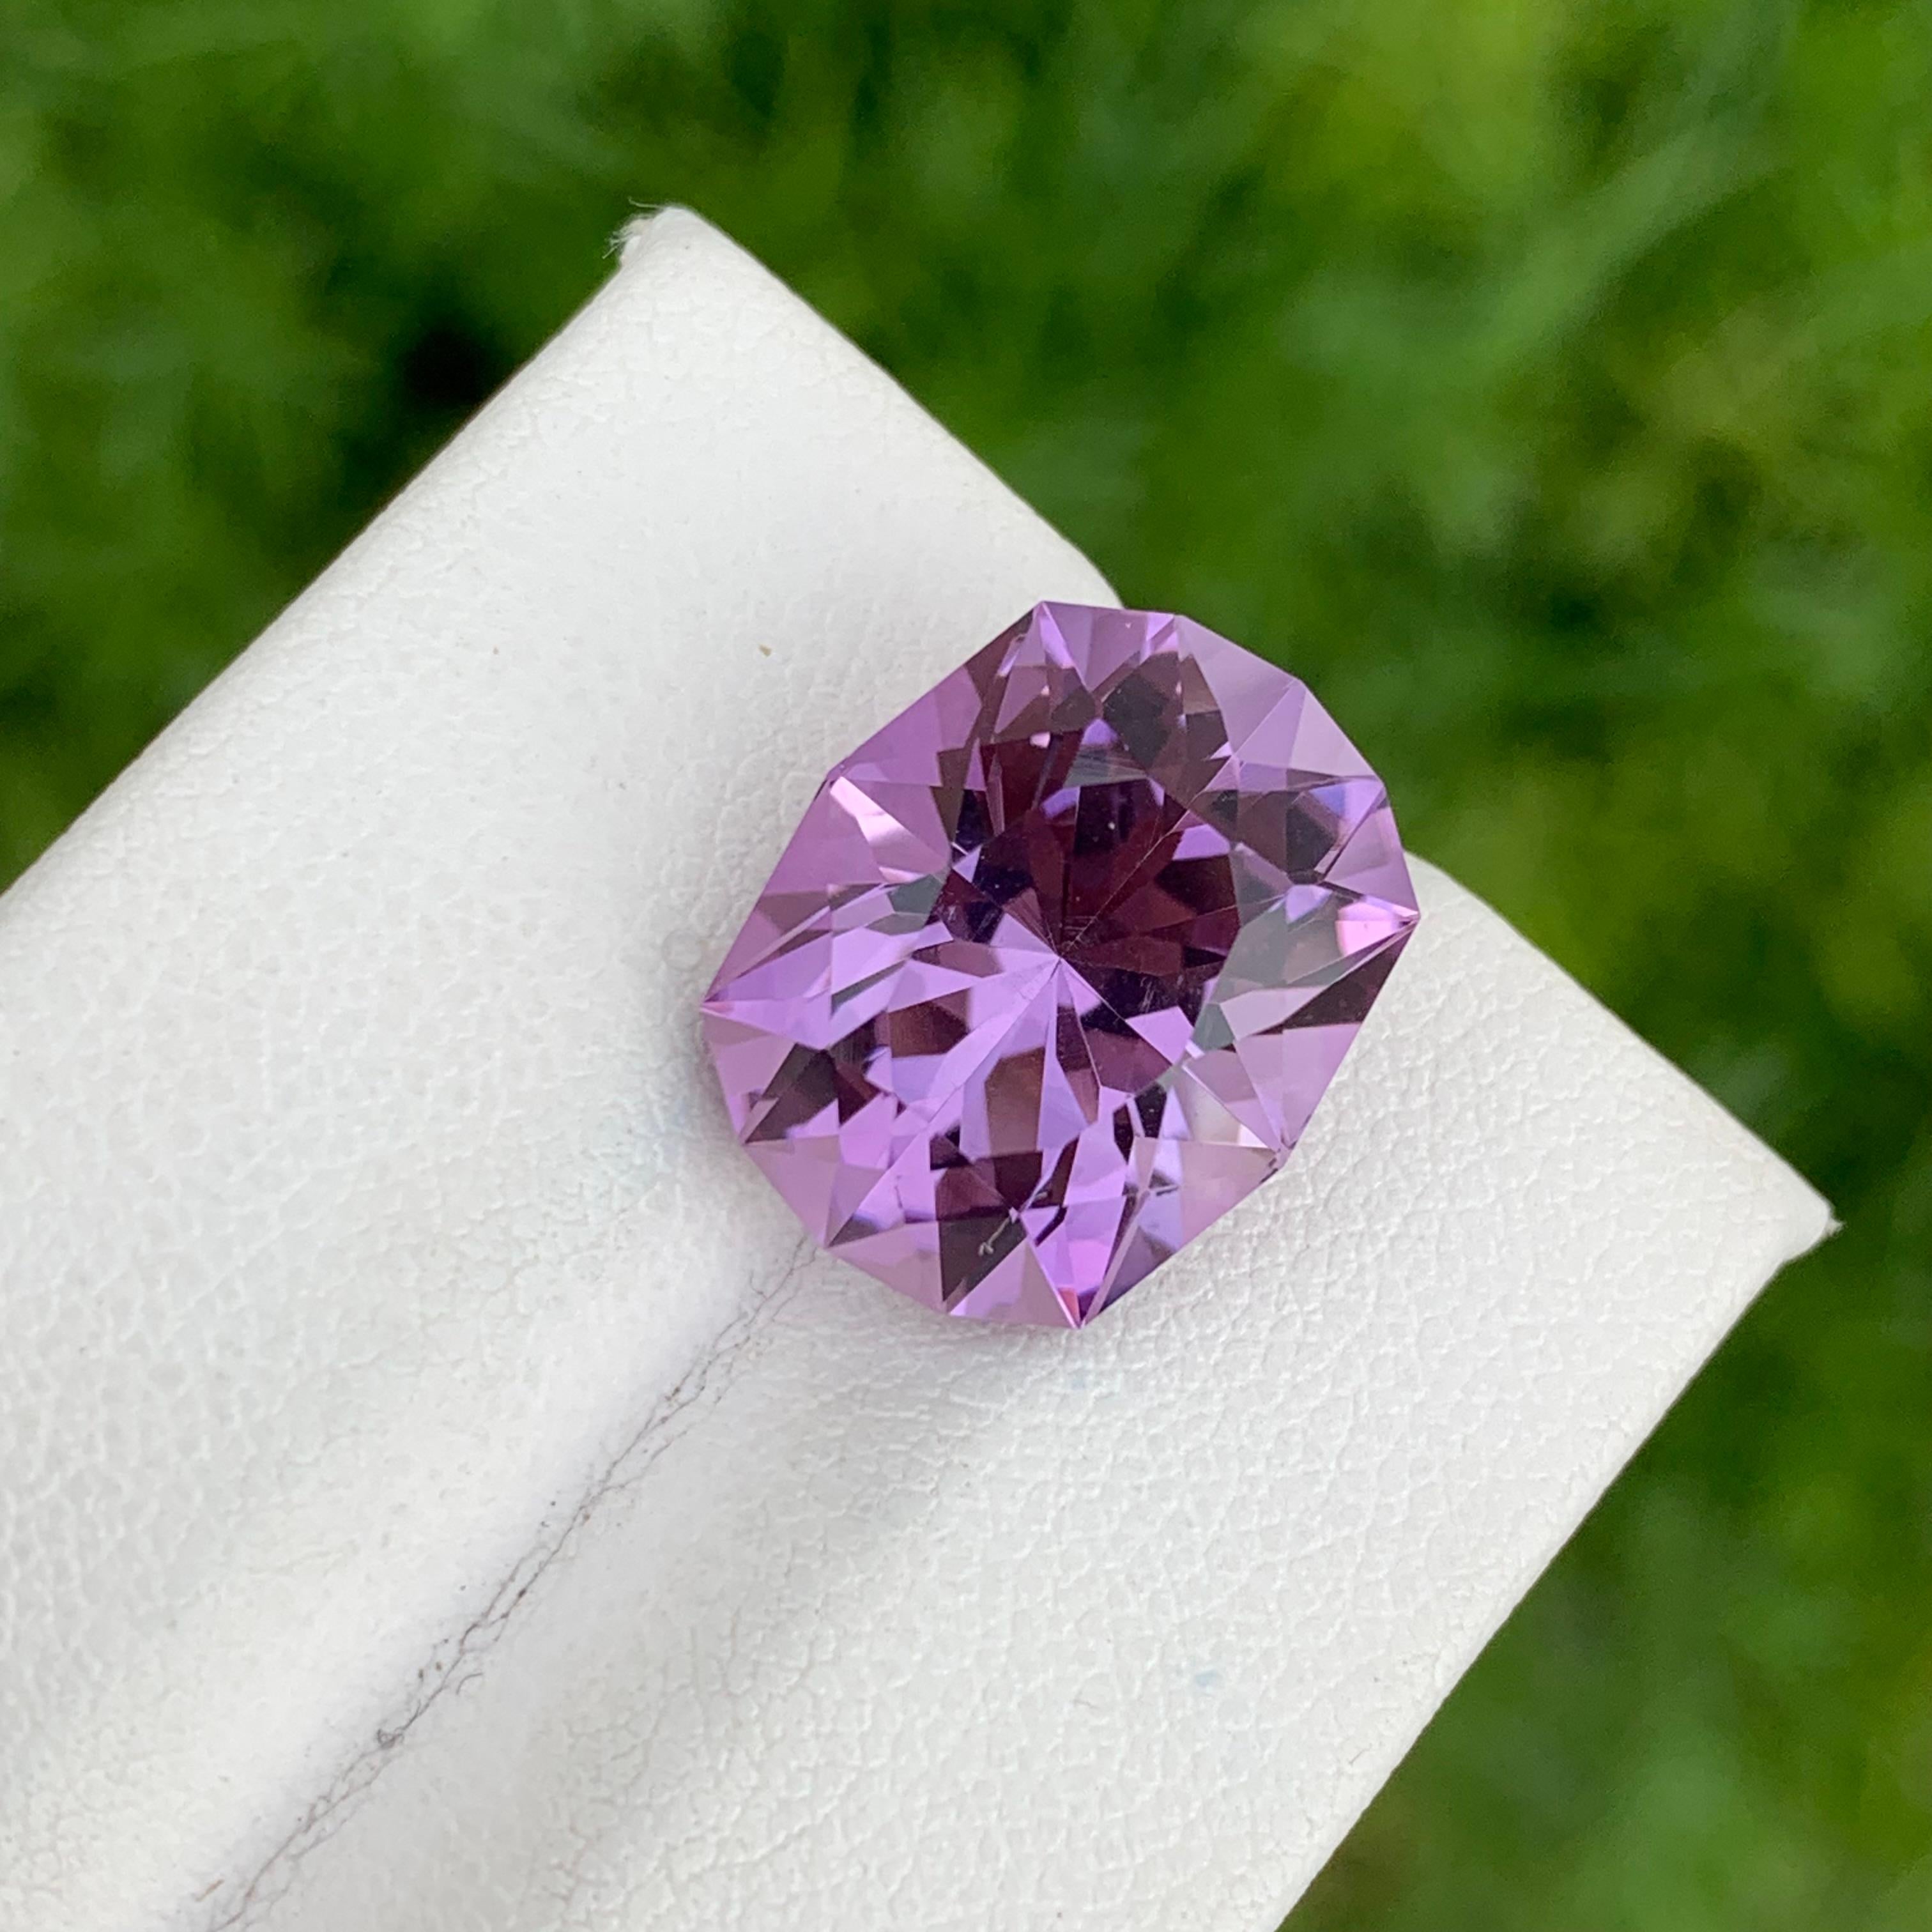 Gemstone Type : Amethyst
Weight : 9.65 Carats
Dimensions : 15.3x12.4x10 mm
Clarity : Eye Clean
Origin : Brazil
Color: Purple
Shape: Fancy
Certificate: On Demand
Month: February
As an AI language model, I do not have the ability to physically provide